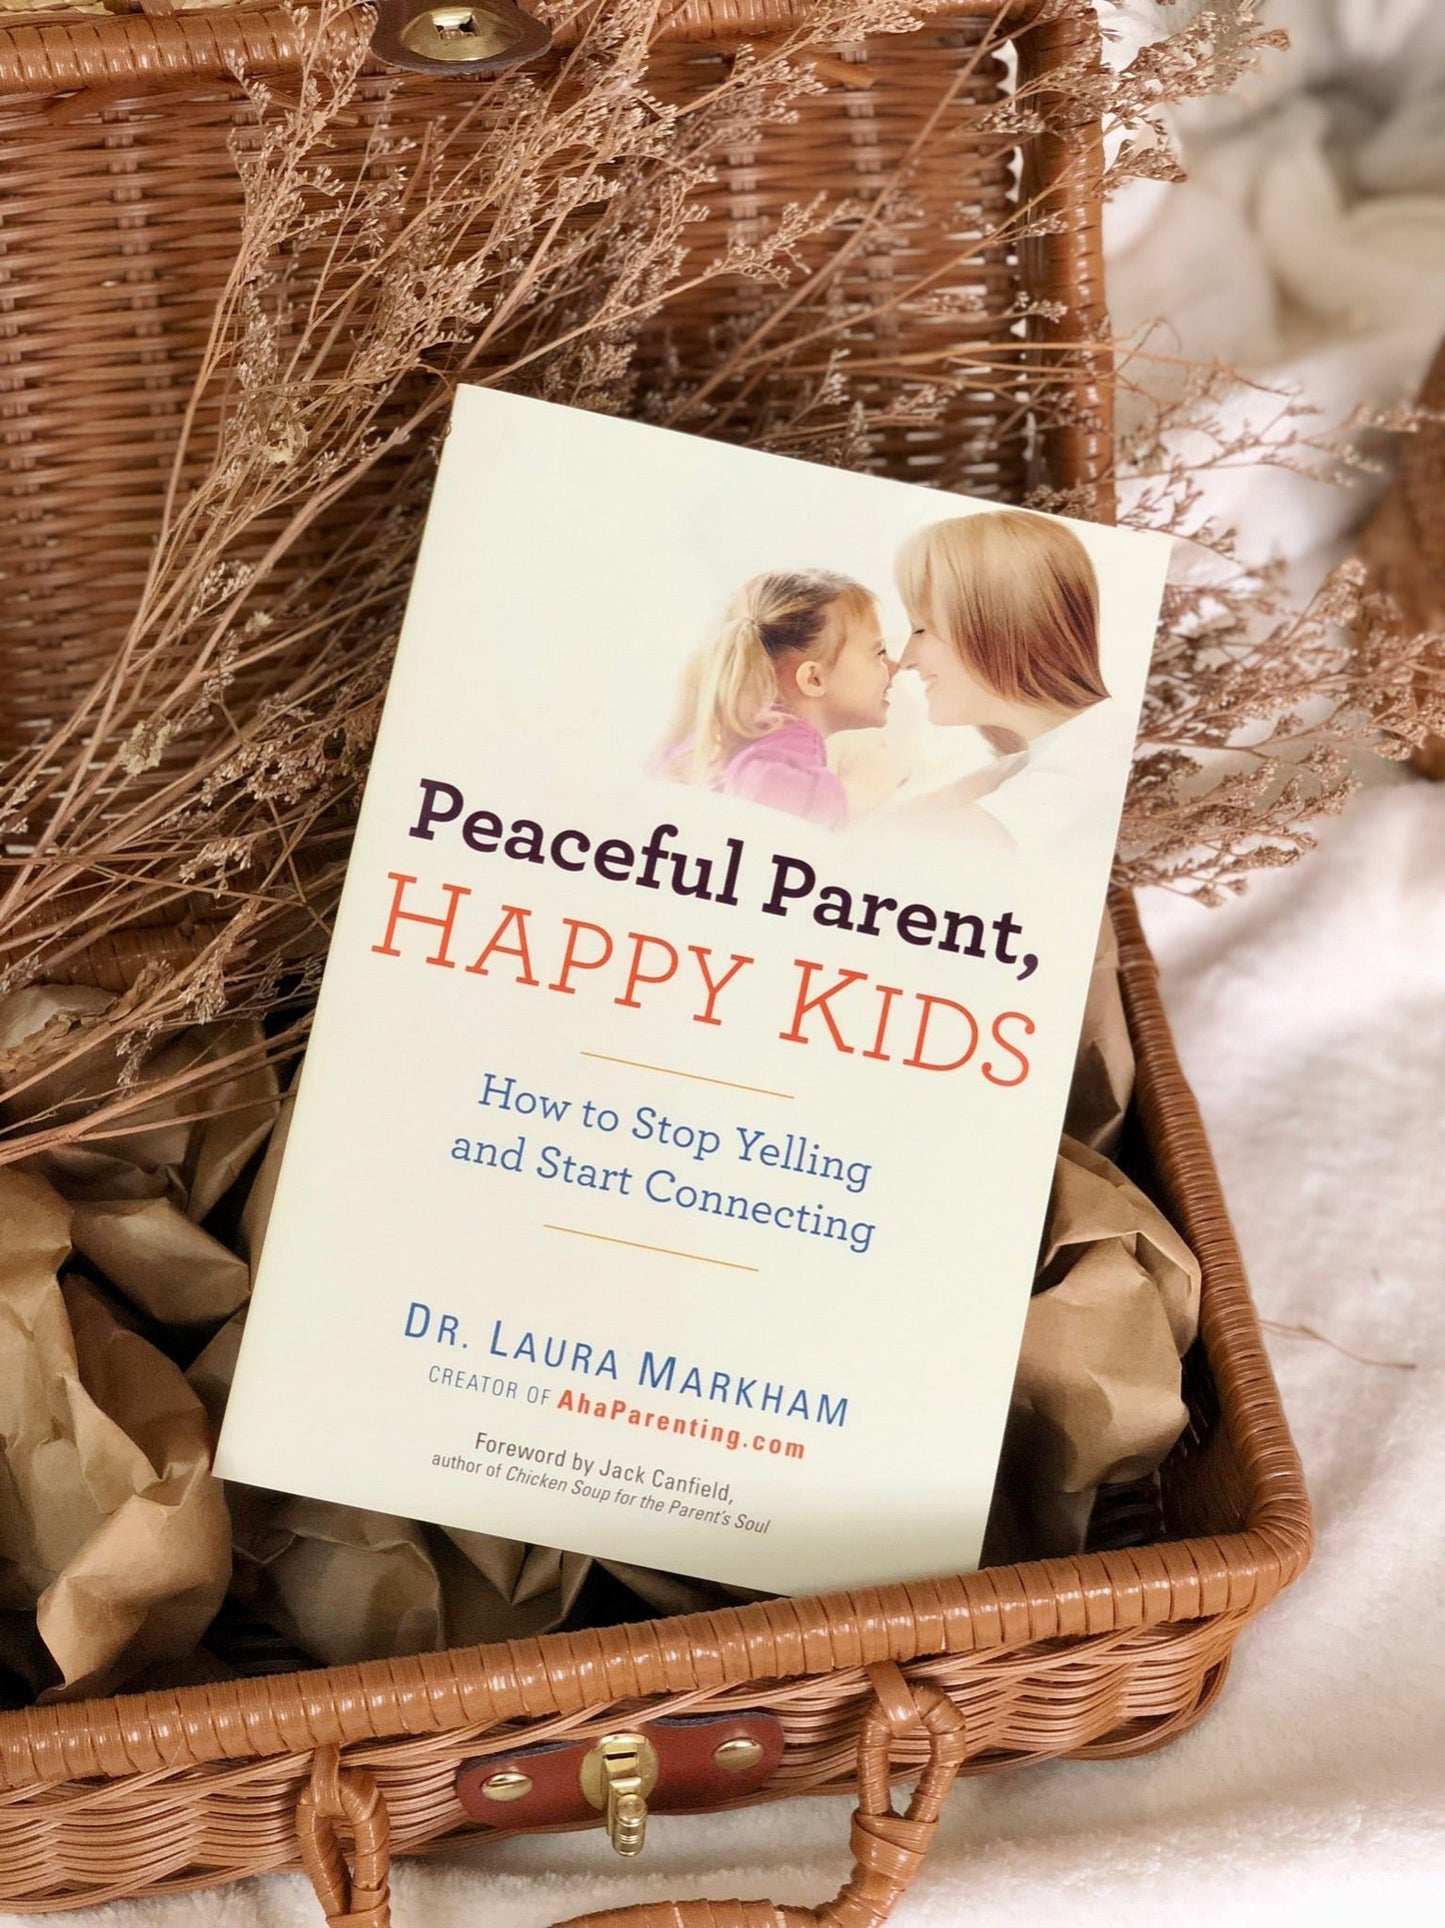 Peaceful Parent, Happy Kids: How to Stop Yelling and Start Connecting - The Chic Habitat